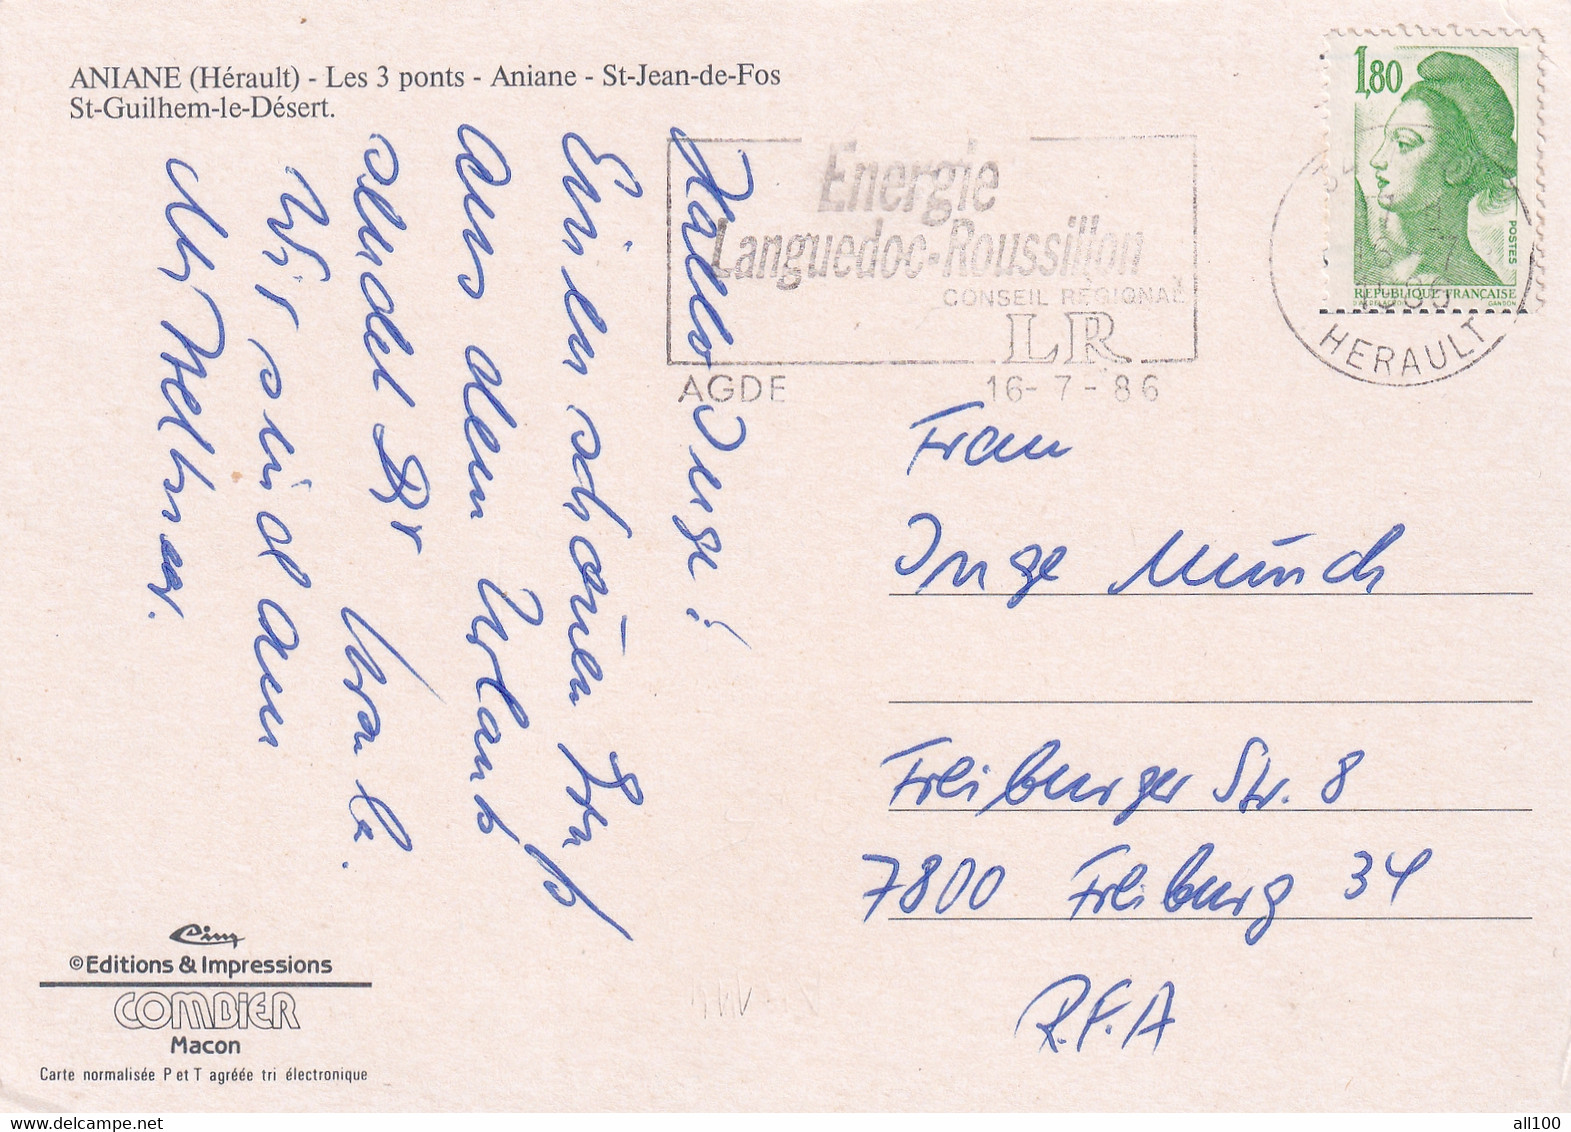 A17702 - ANIANE HERAULT, LES 3 PONTS, ST-JEAN-DE-FOS, POST CARD, USED, 1986, SENT TO FREIBURG - Aniane